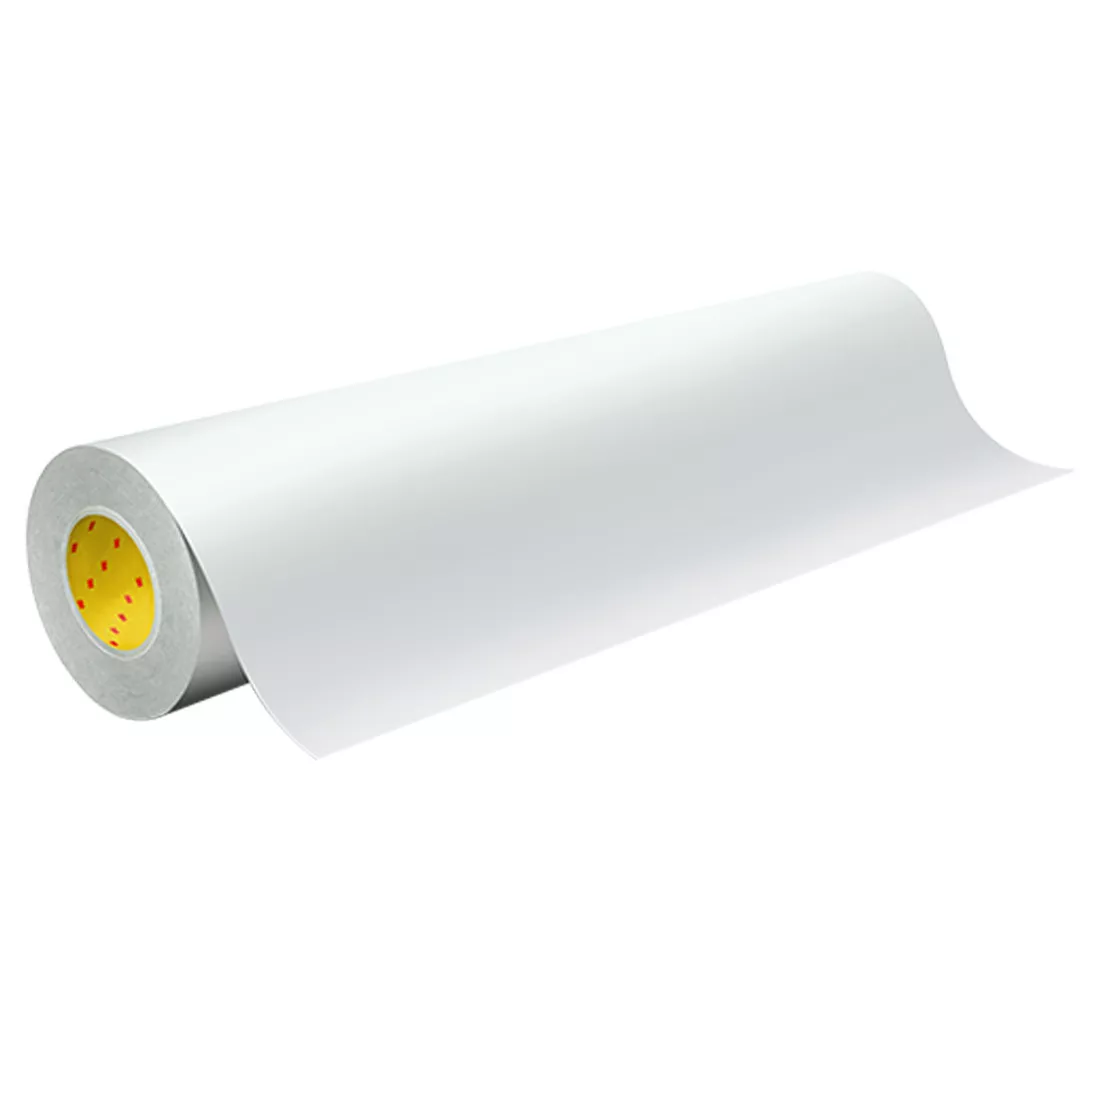 3M™ Adhesive Transfer Tape 91022, Clear, 36 in x 60 yd, 2 mil, 1 roll
per case